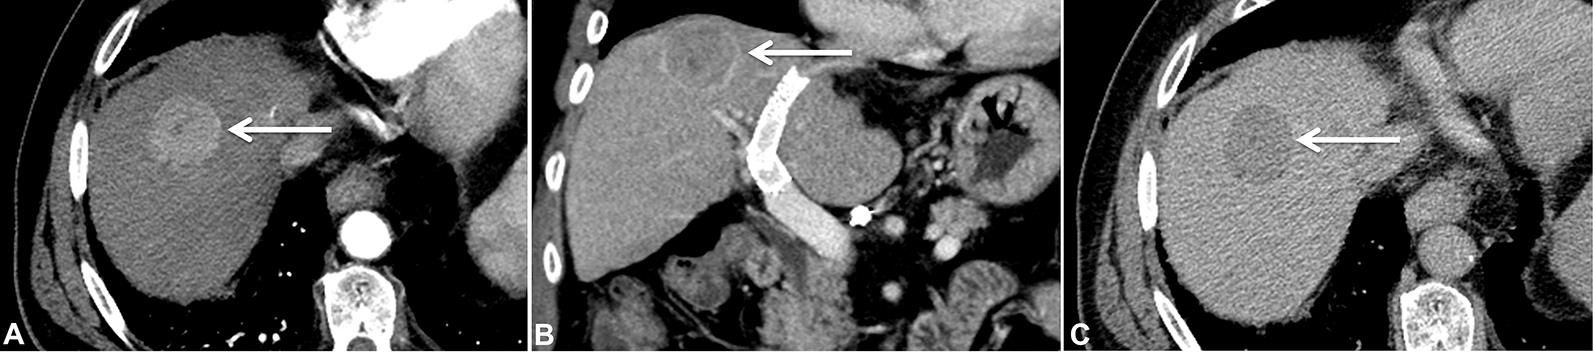 Multiphase, contrast-enhanced CT scan in a 52 year-old man with a history of cirrhosis and transjugular intrahepatic portosystemic shunt placement.